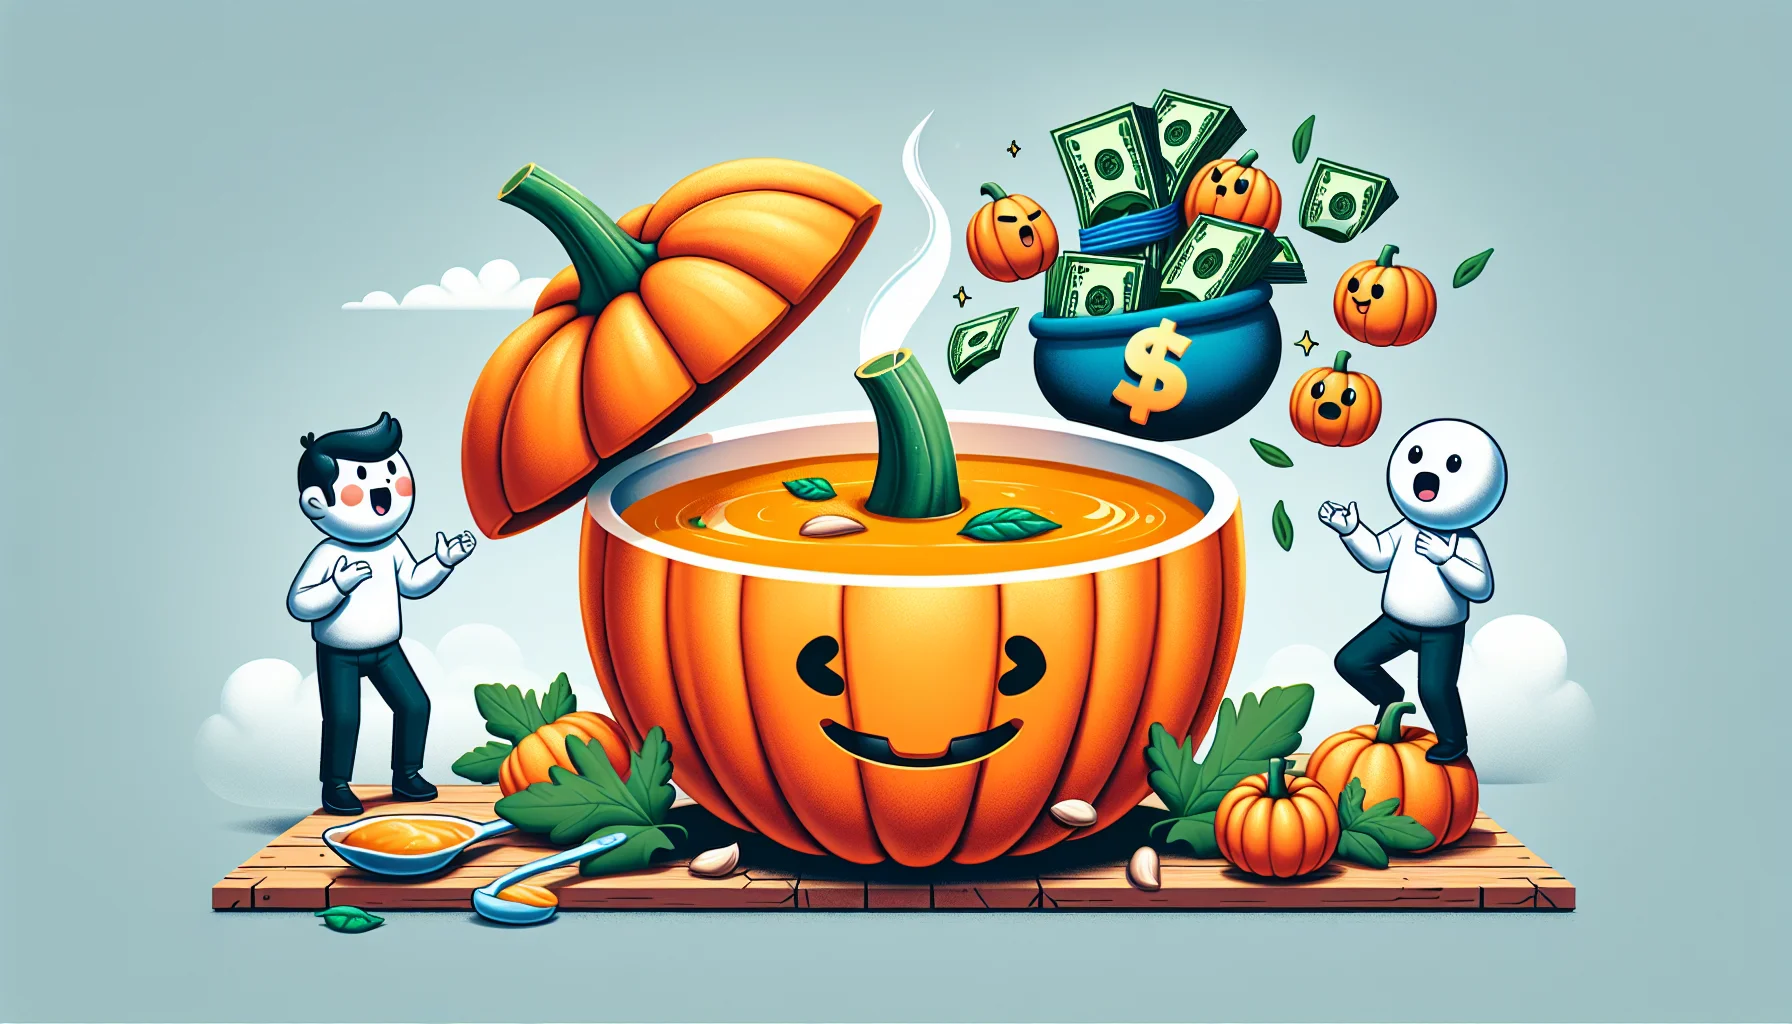 Create an image depicting an amusing scene of a large, vibrant pumpkin transforming into a steaming bowl of pumpkin soup. The soup is surrounded by various herbs and spices, and a bundle of dollar bills is leaning against it, accentuating the inexpensive nature of the dish. A couple of cartoon human characters of different genders and descents are observing this magical transformation with surprised and delighted expressions. Make sure to visually communicate that this flavorful and hearty pumpkin soup is an excellent choice for flu season due to its health benefits.